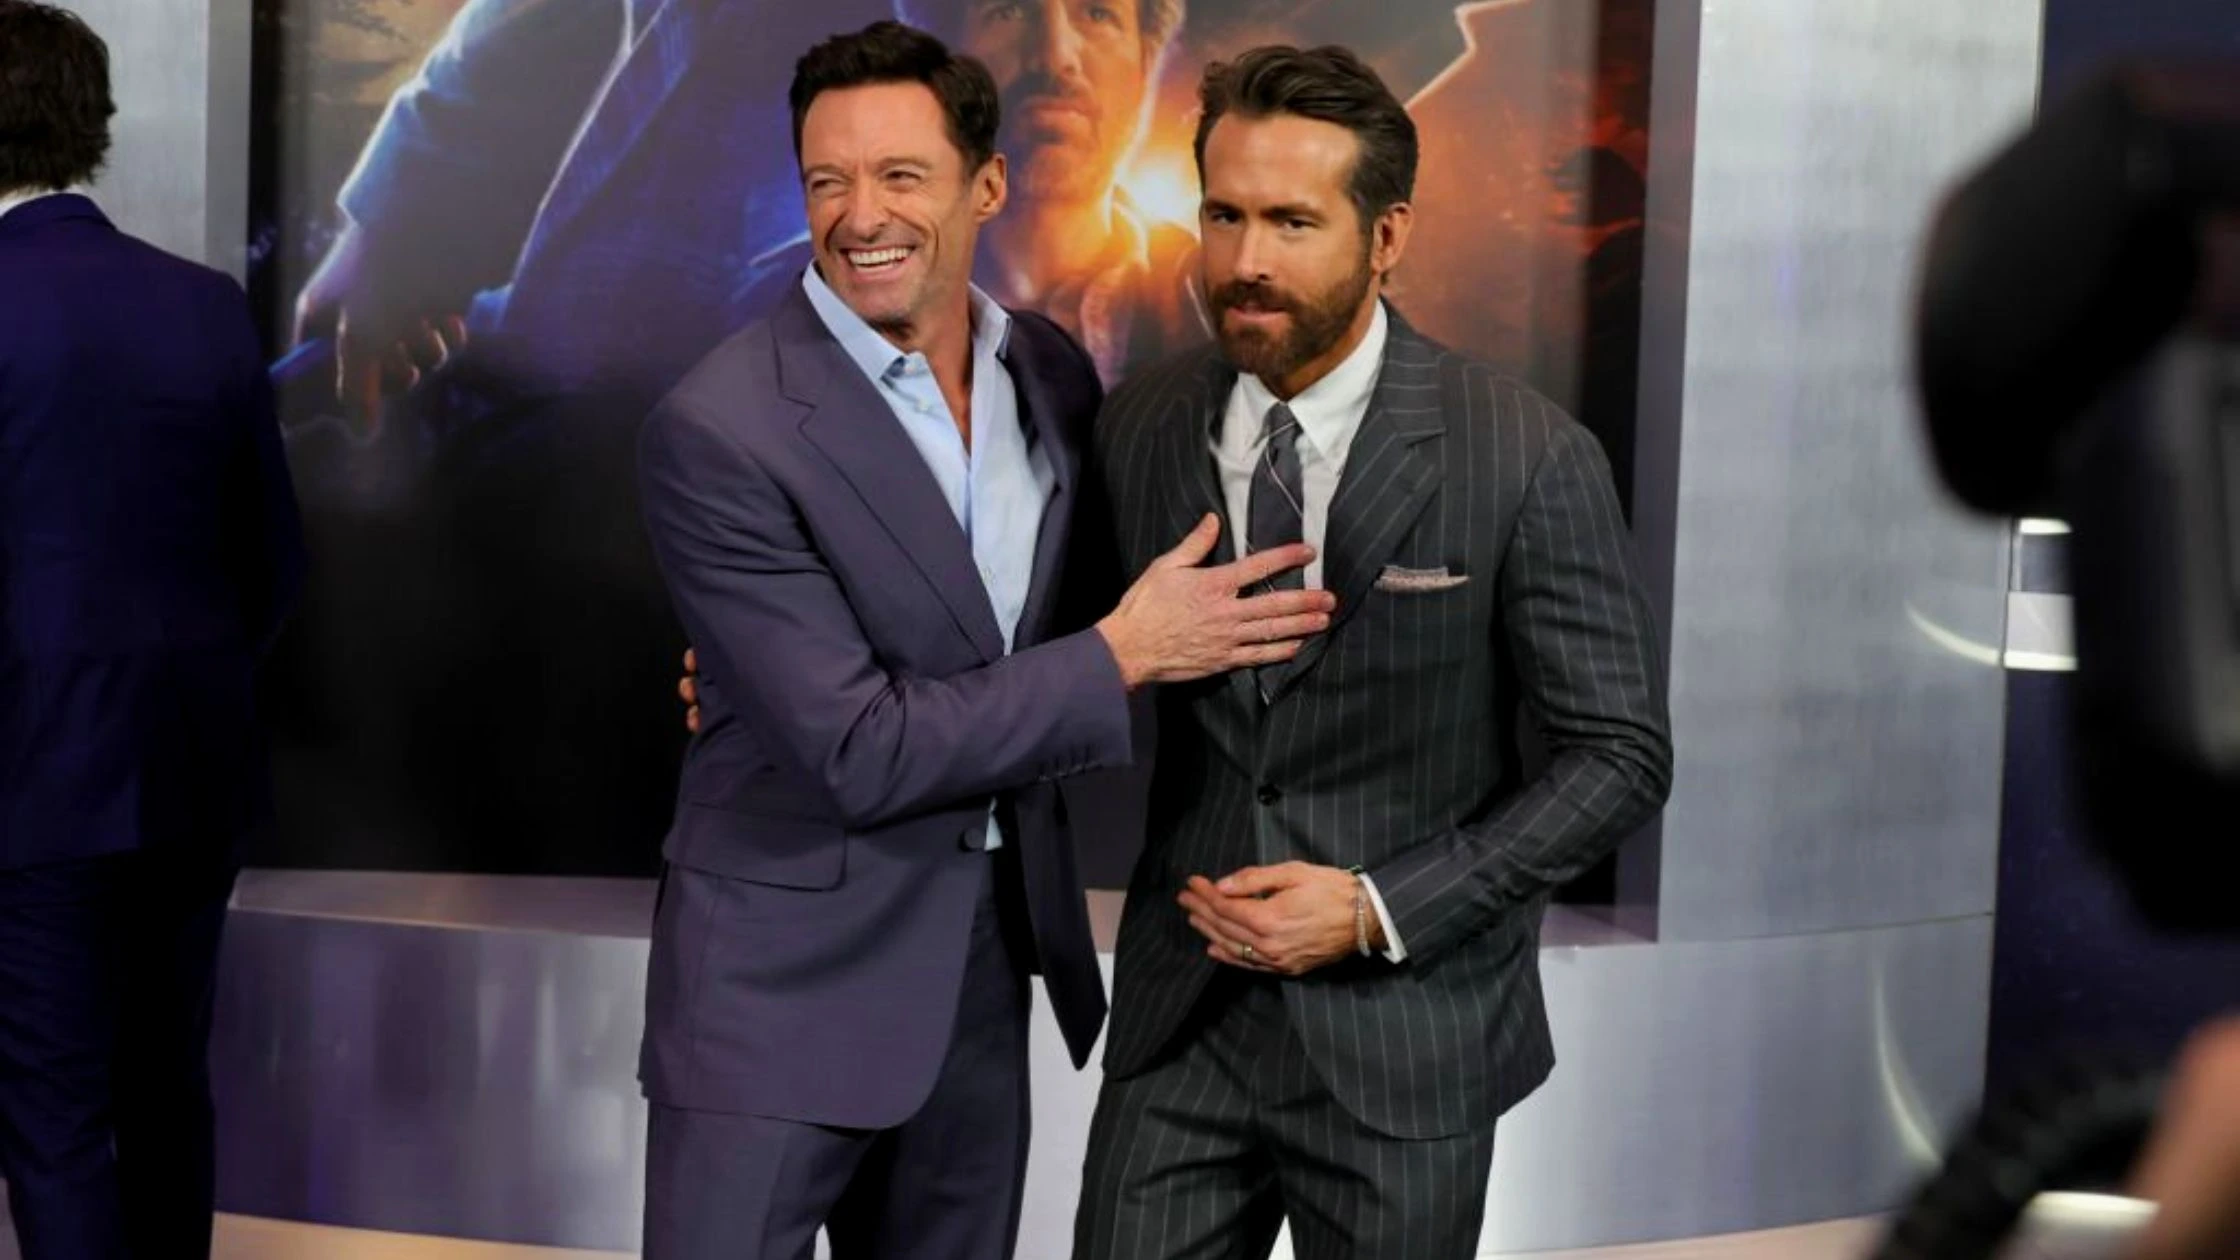 The New Buffed-Up Image Of Huge Jackman For “Deadpool 3” Took A Dig At Ryan Reynold’s, Once Again